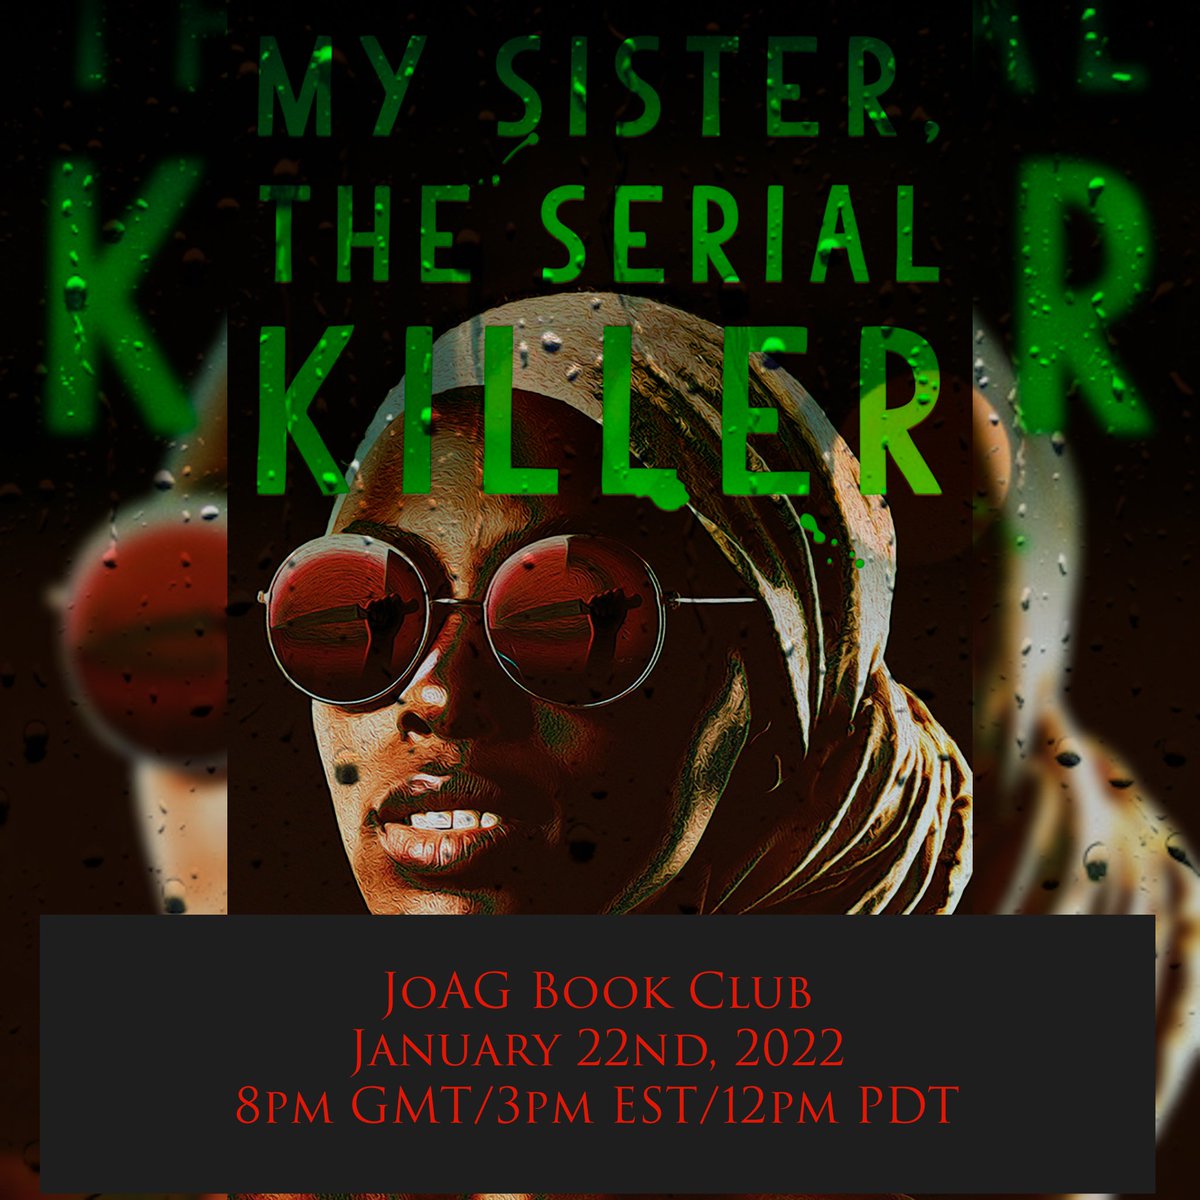 Don't miss our first JoAG book club of the year on January 22nd! We'll be talking about #mysistertheserialkiller, plus making some plans for this year's reads and schedule!  Cannot WAIT to get back in the reading groove with all you smart, spooky people!